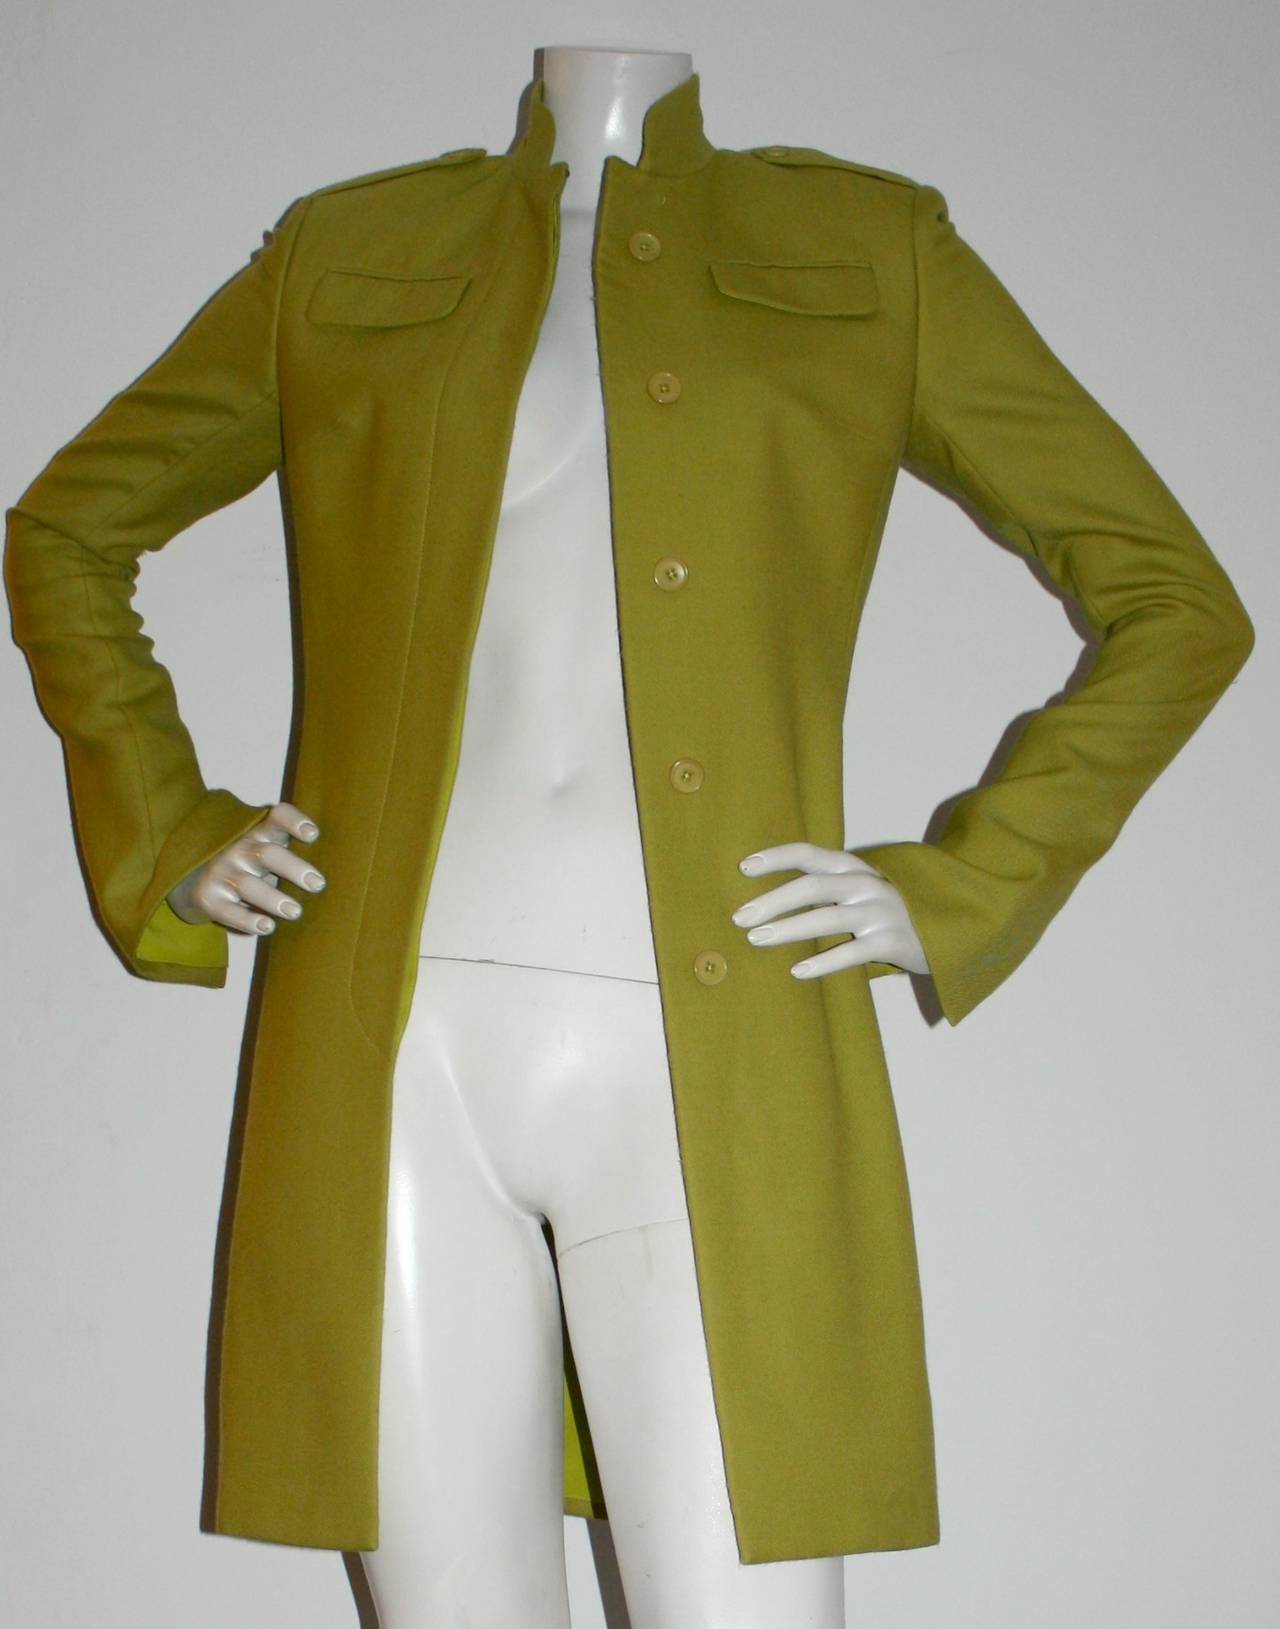 Gorgeous vintage Richard Tyler Couture military-inspired jacket. This is a runway sample piece from the 1990s. Vivid chartreuse color, with chic slits on inner cuff for a bell-effect...Perfect to accommodate gloves. Hidden buttons up the front.